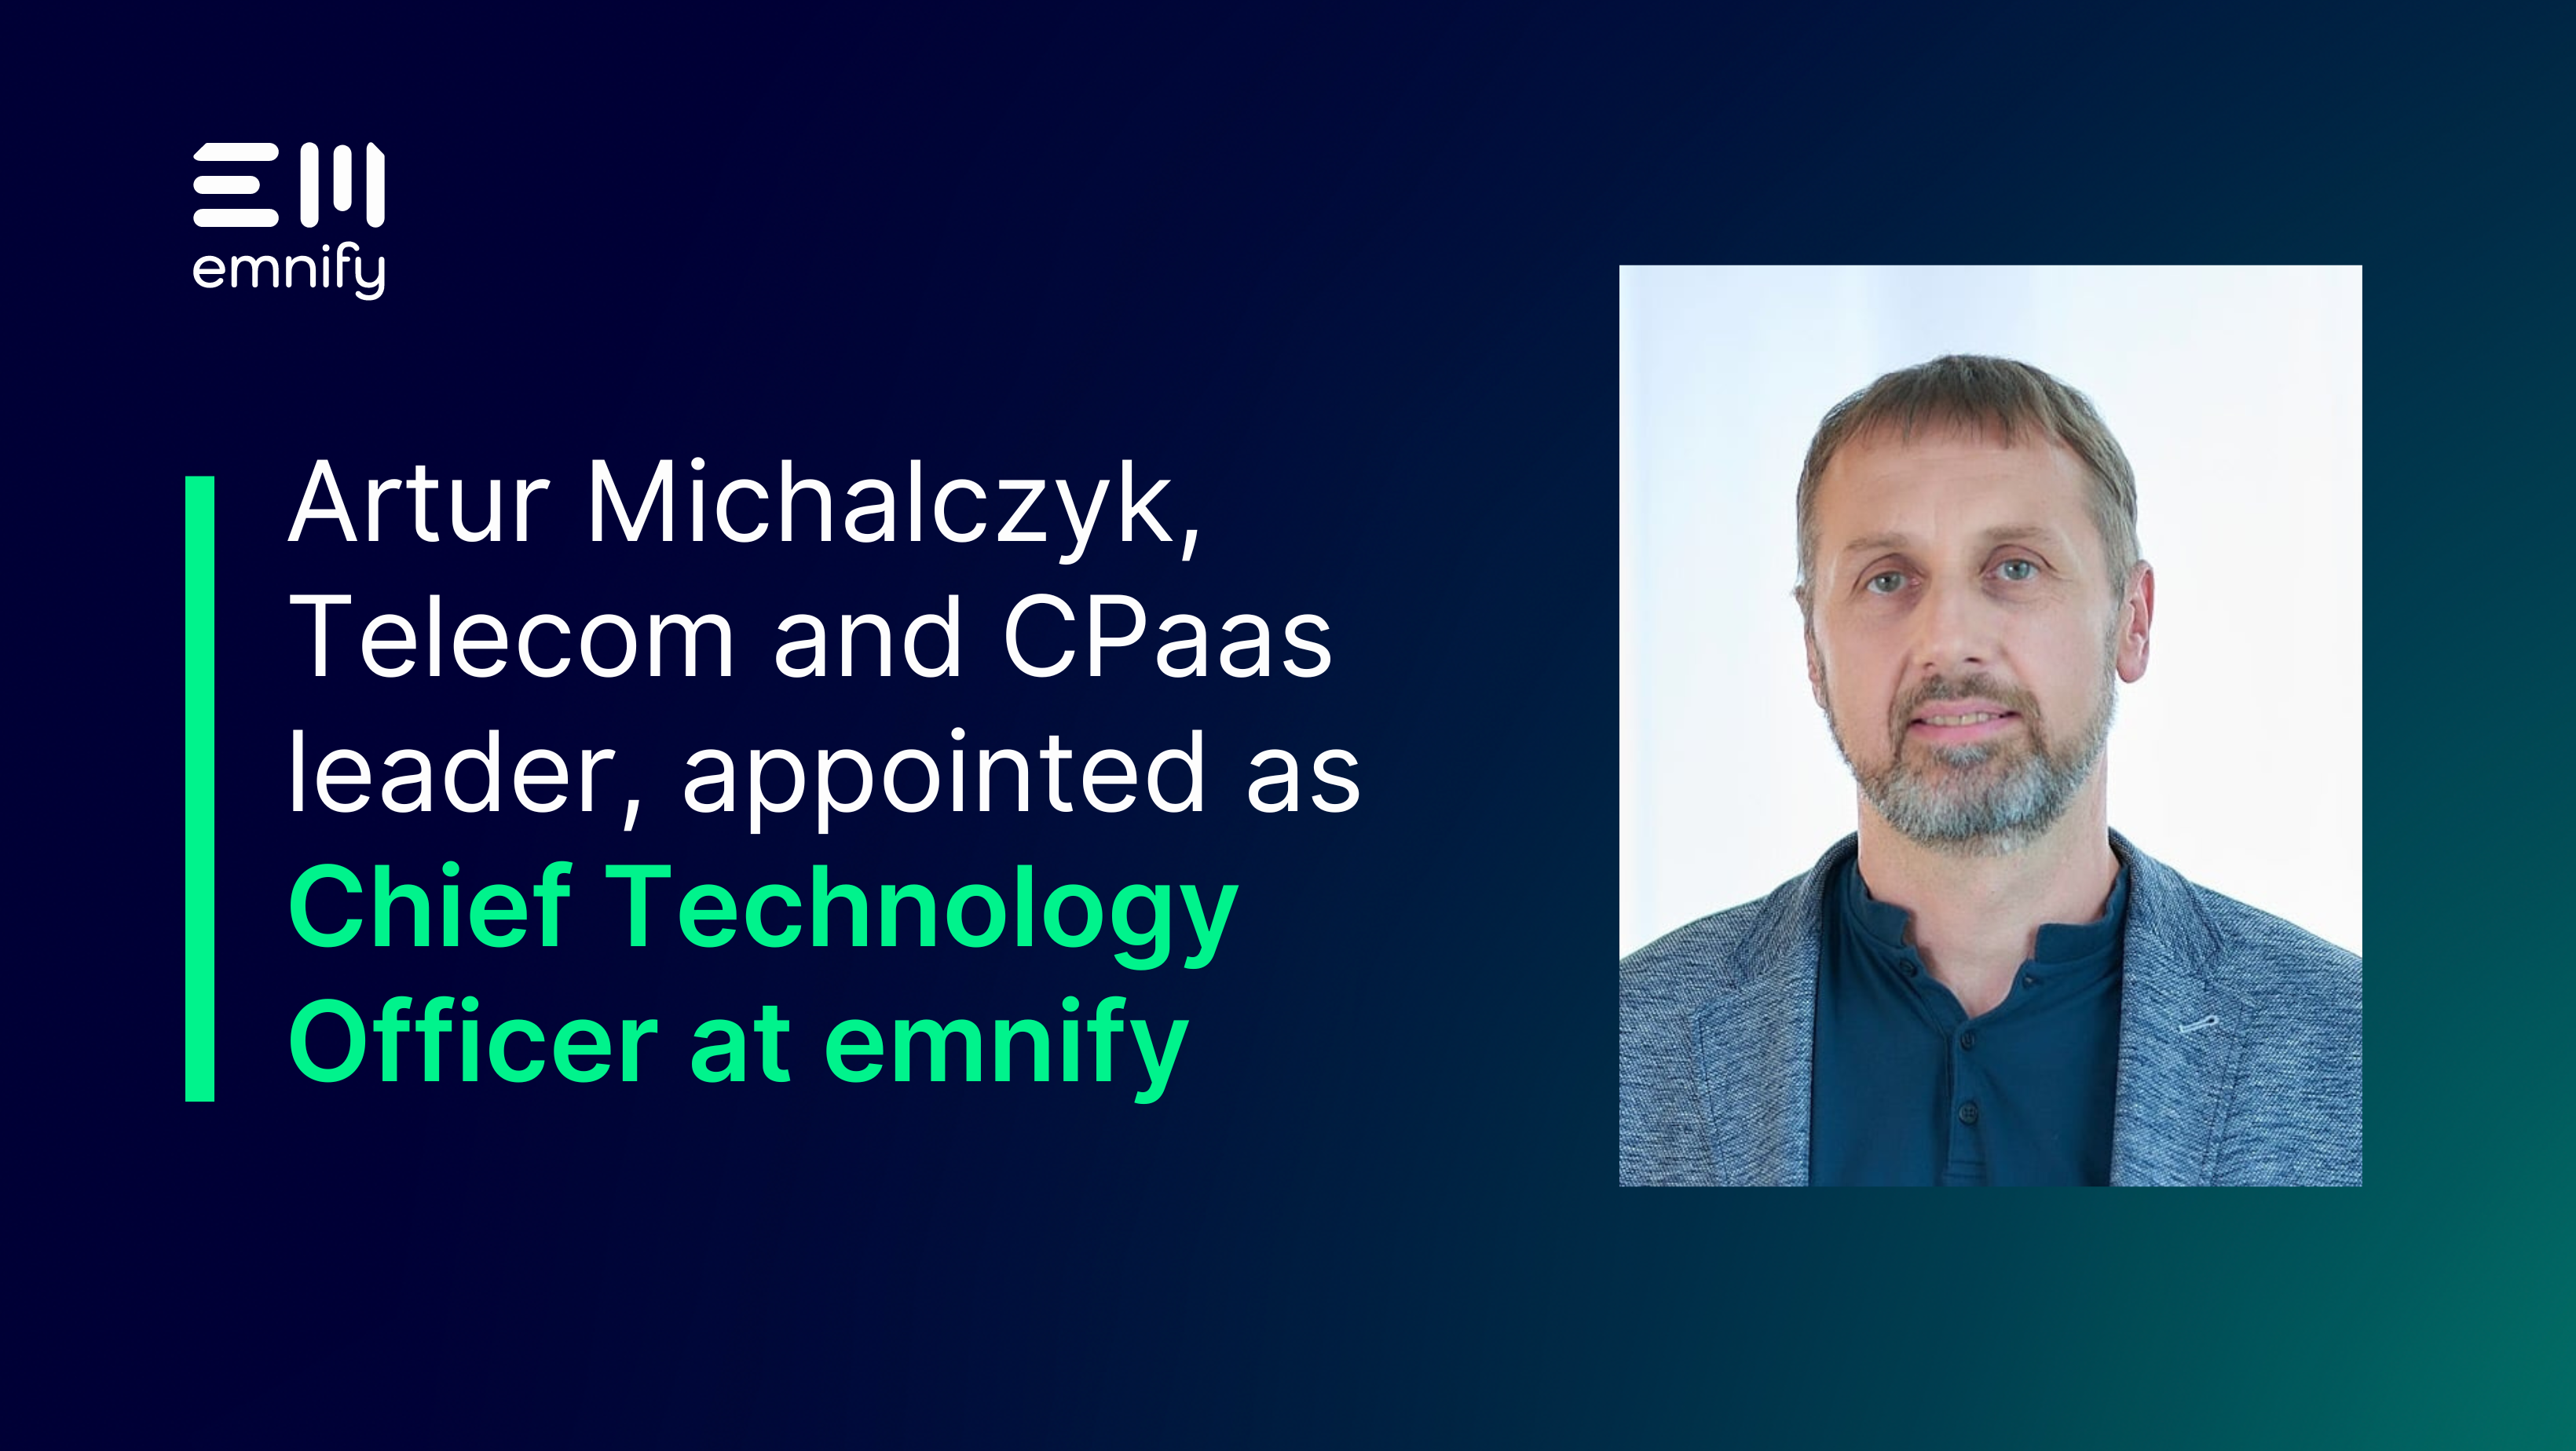 Image for post Artur Michalczyk, Telecom and CPaaS leader, appointed as Chief Technology Officer at emnify